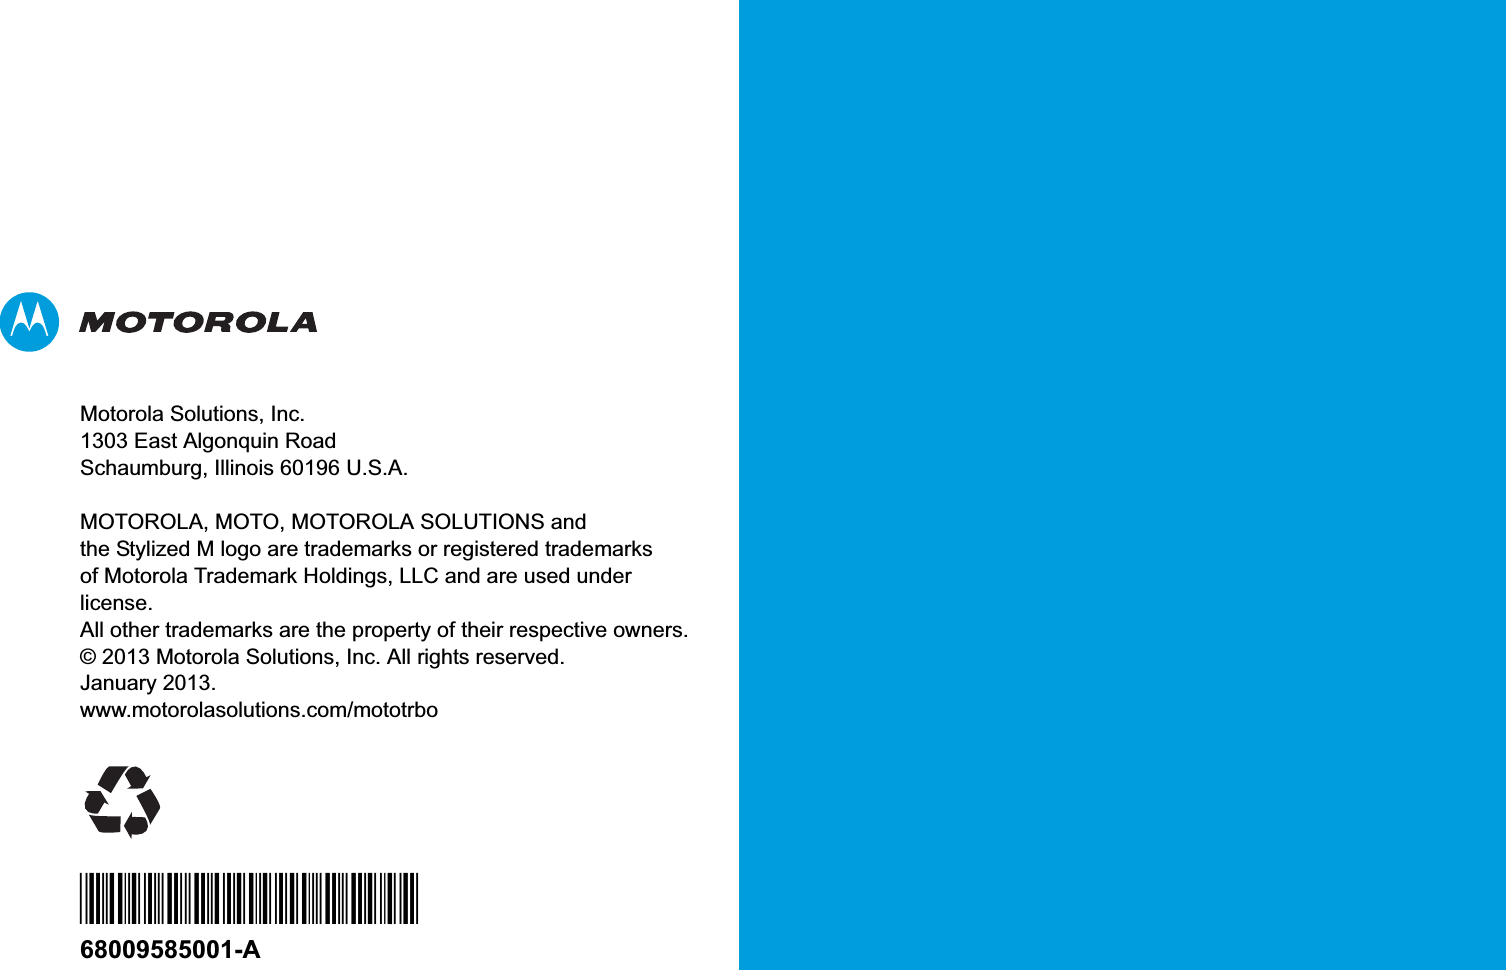 Motorola Solutions, Inc.1303 East Algonquin RoadSchaumburg, Illinois 60196 U.S.A.MOTOROLA, MOTO, MOTOROLA SOLUTIONS and the Stylized M logo are trademarks or registered trademarks of Motorola Trademark Holdings, LLC and are used under license.All other trademarks are the property of their respective owners. © 2013 Motorola Solutions, Inc. All rights reserved.January 2013.www.motorolasolutions.com/mototrbo*68009585001*68009585001-A